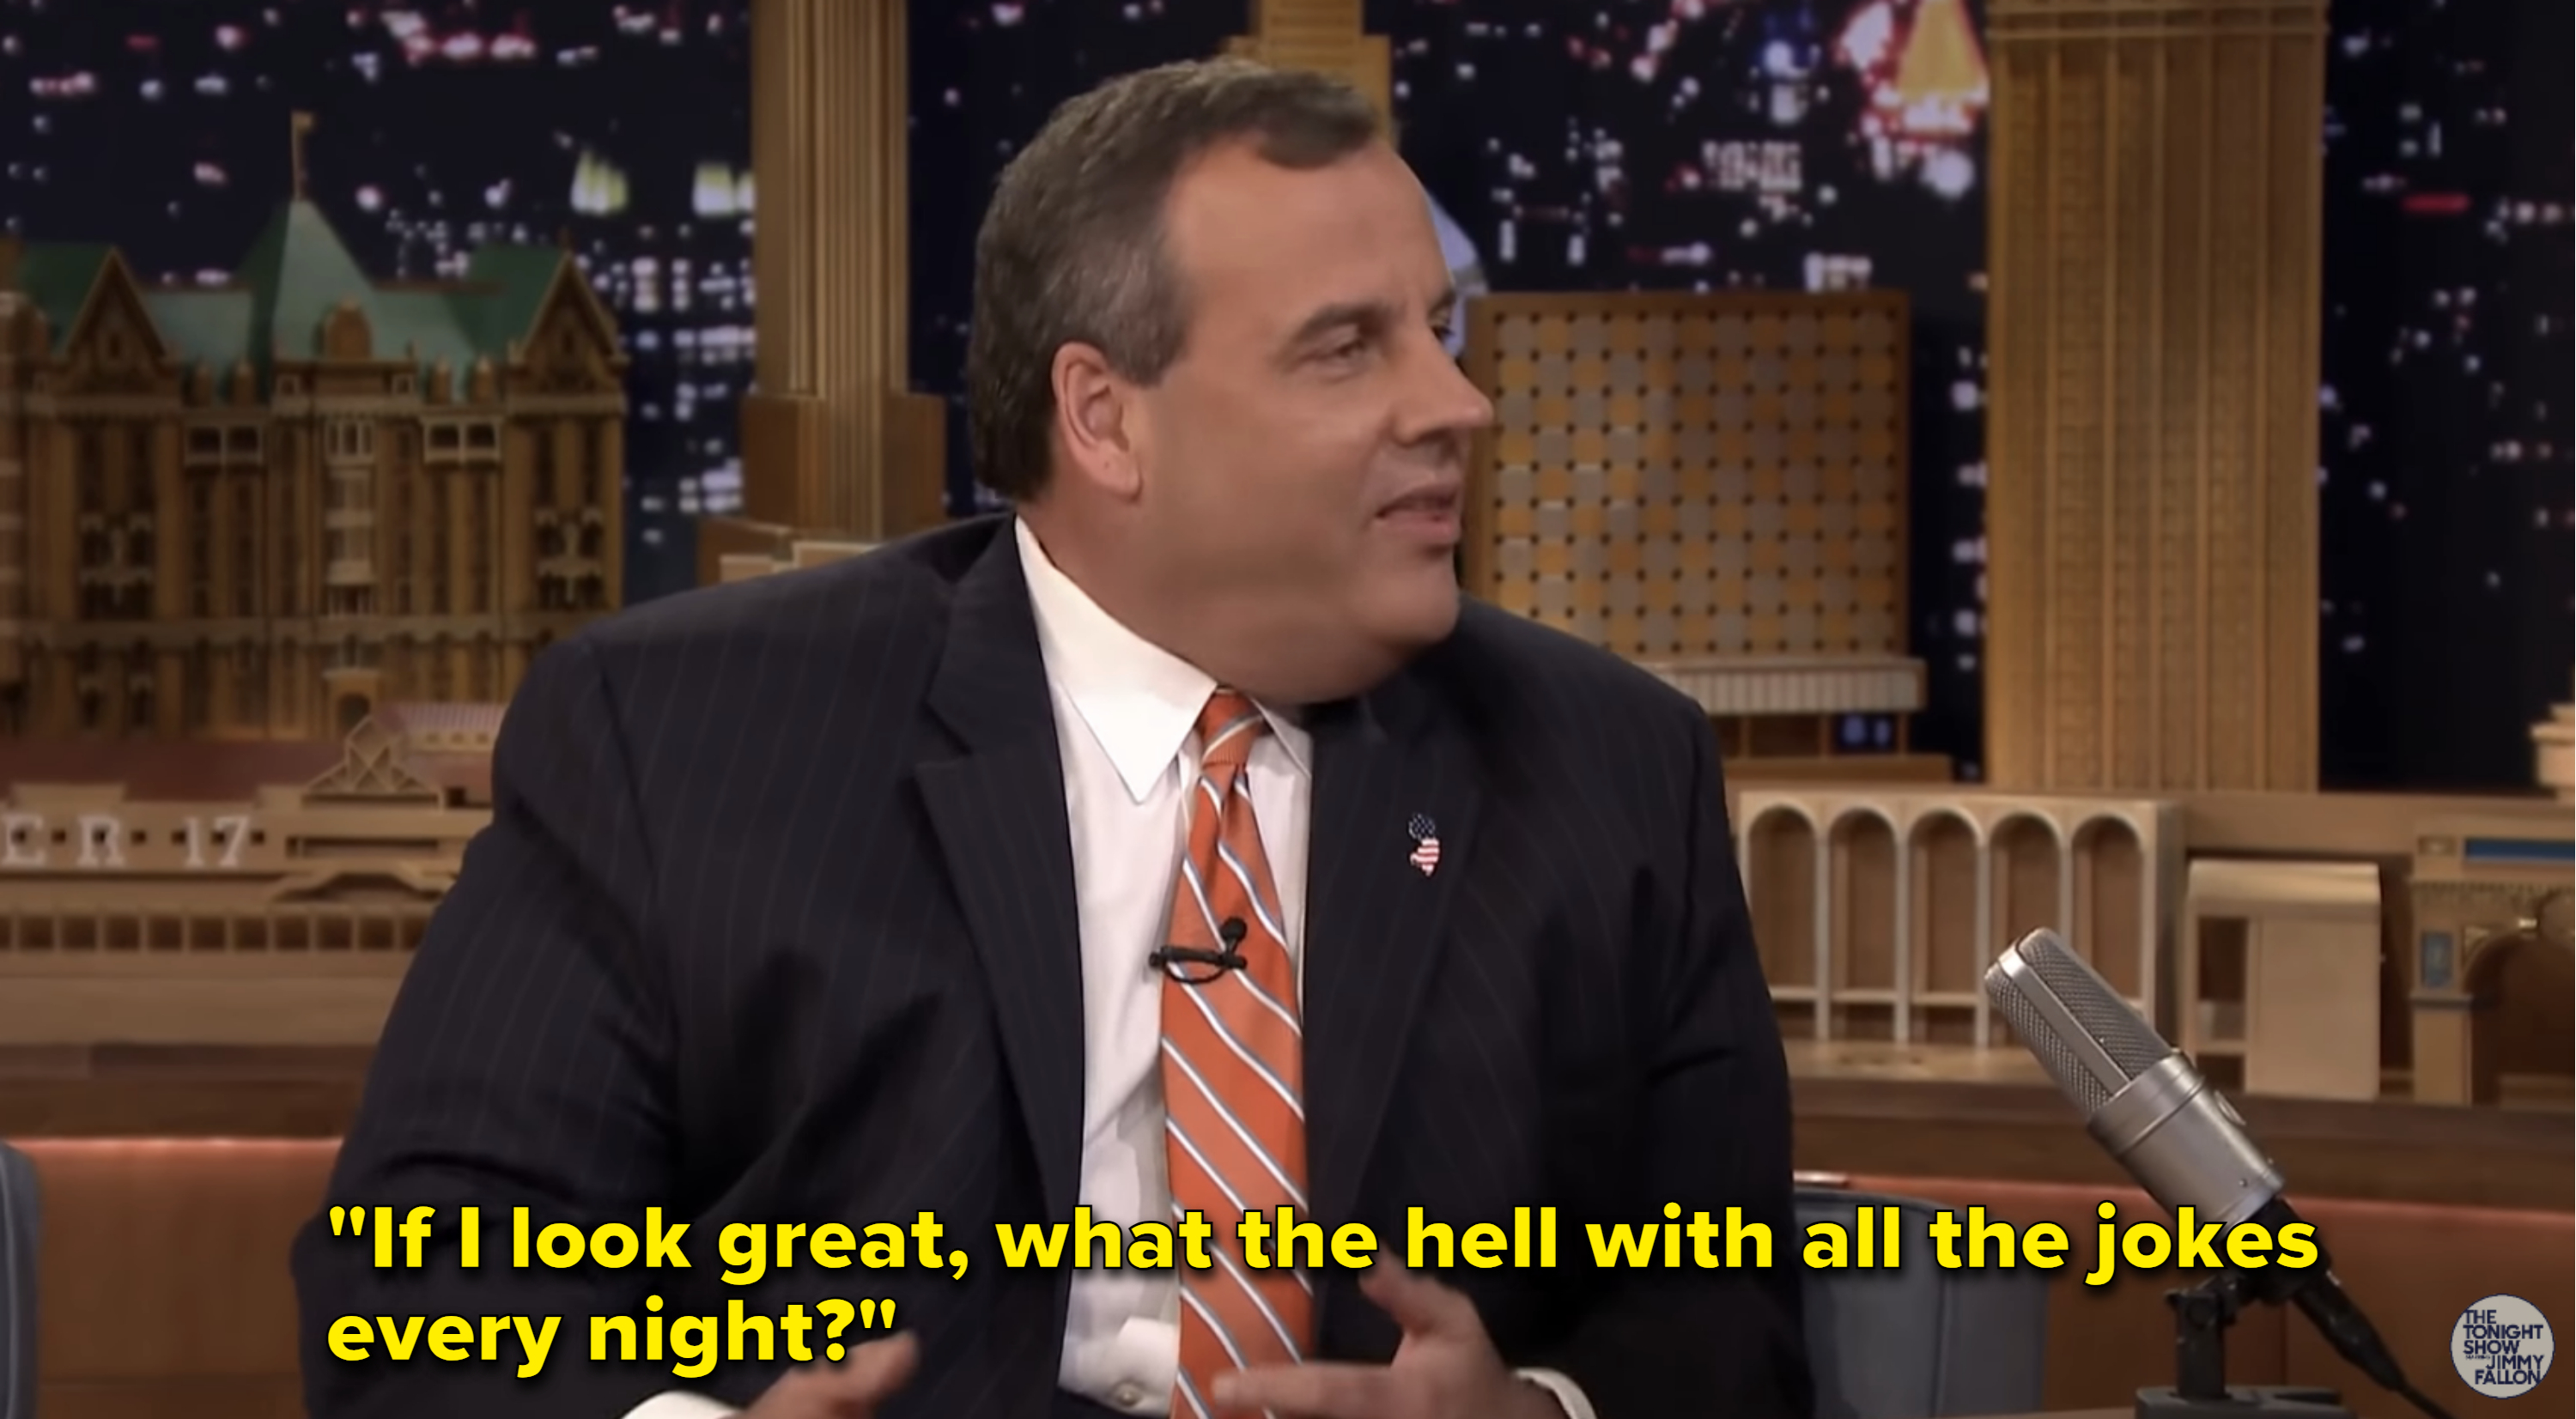 Chris Christie asked, &quot;If I look great, what the hell with all the jokes every night?&quot;